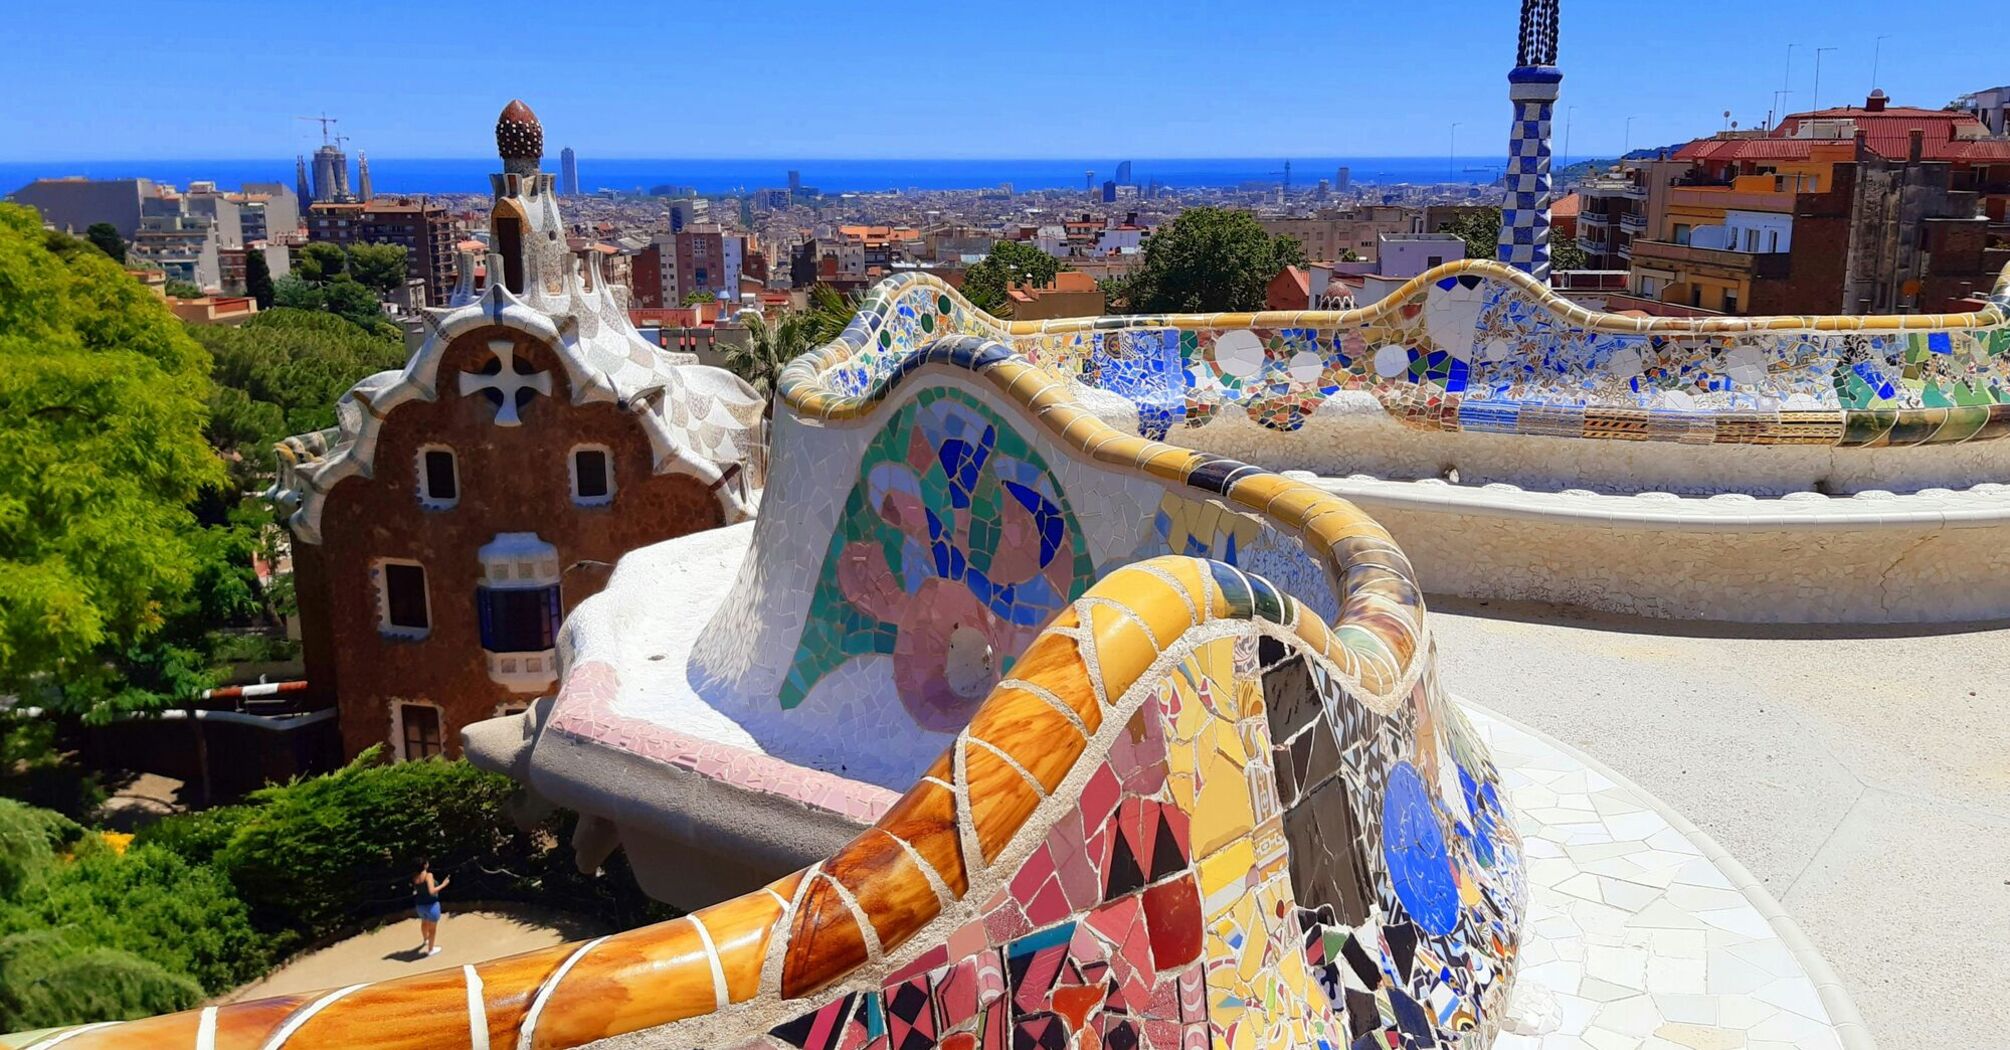 A view from the benches on a summer day at Park Güell in Barcelona, Spain